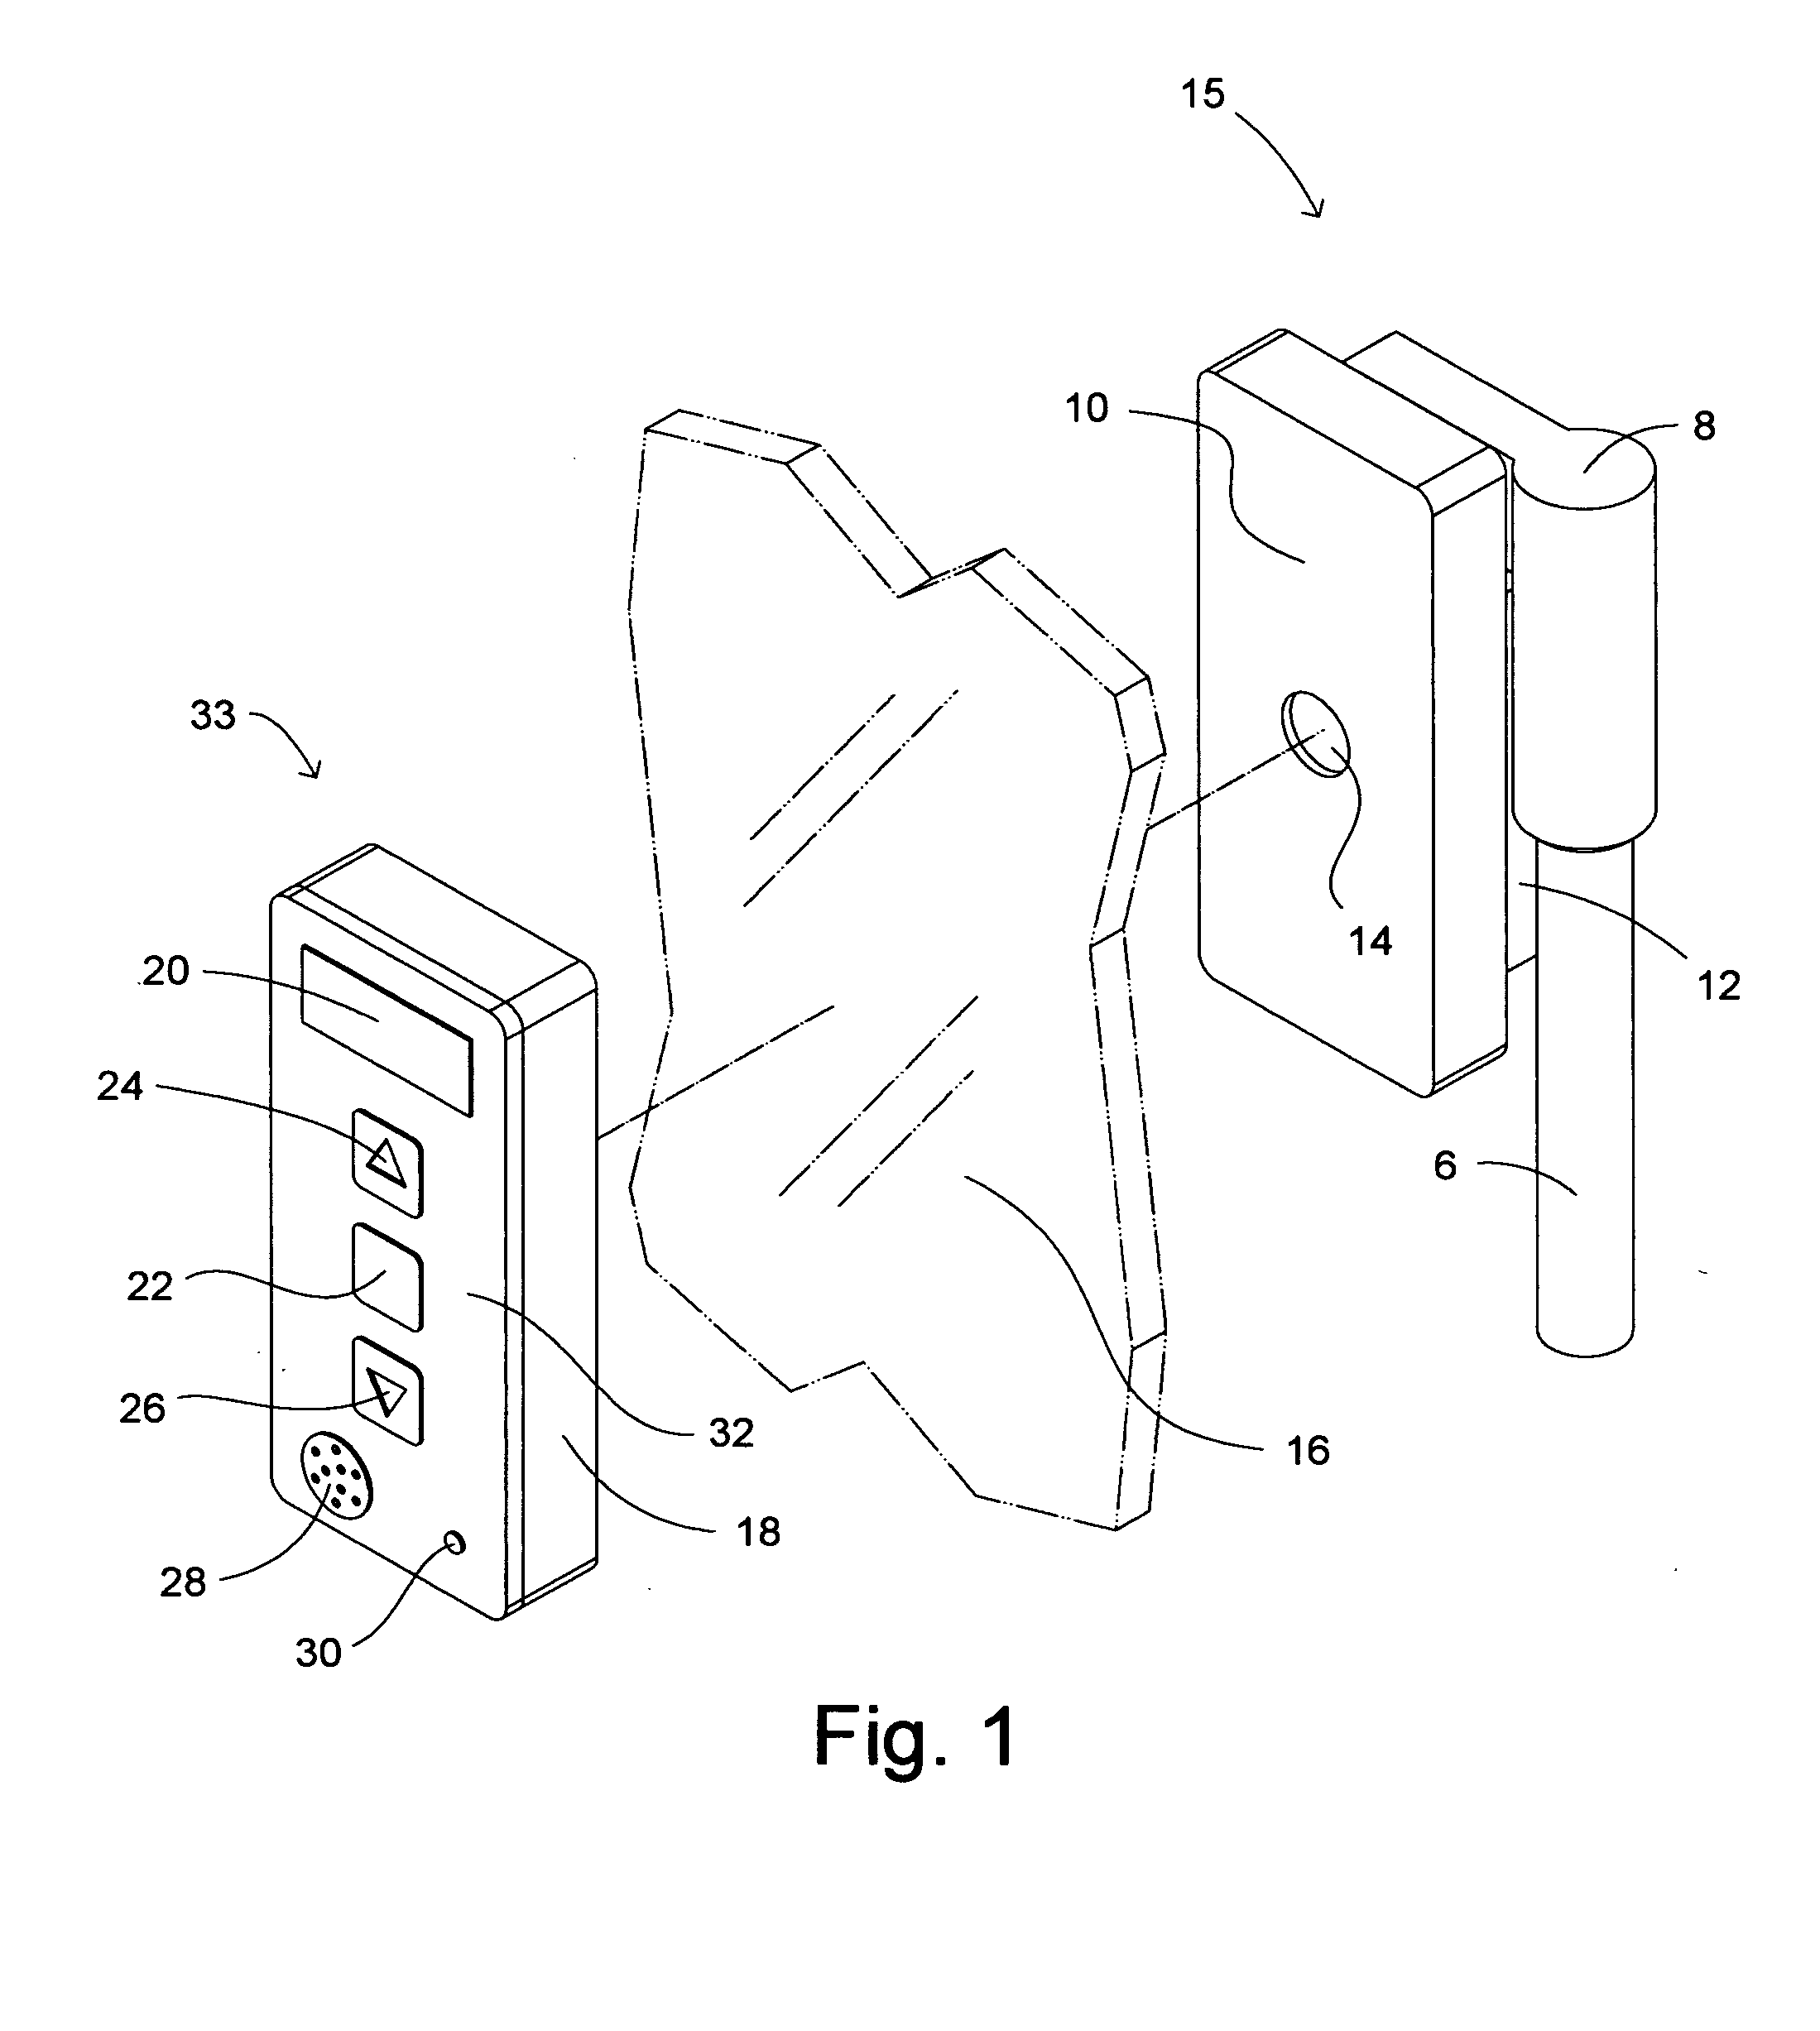 Wireless electronic monitor for a container such as an aquarium and the like